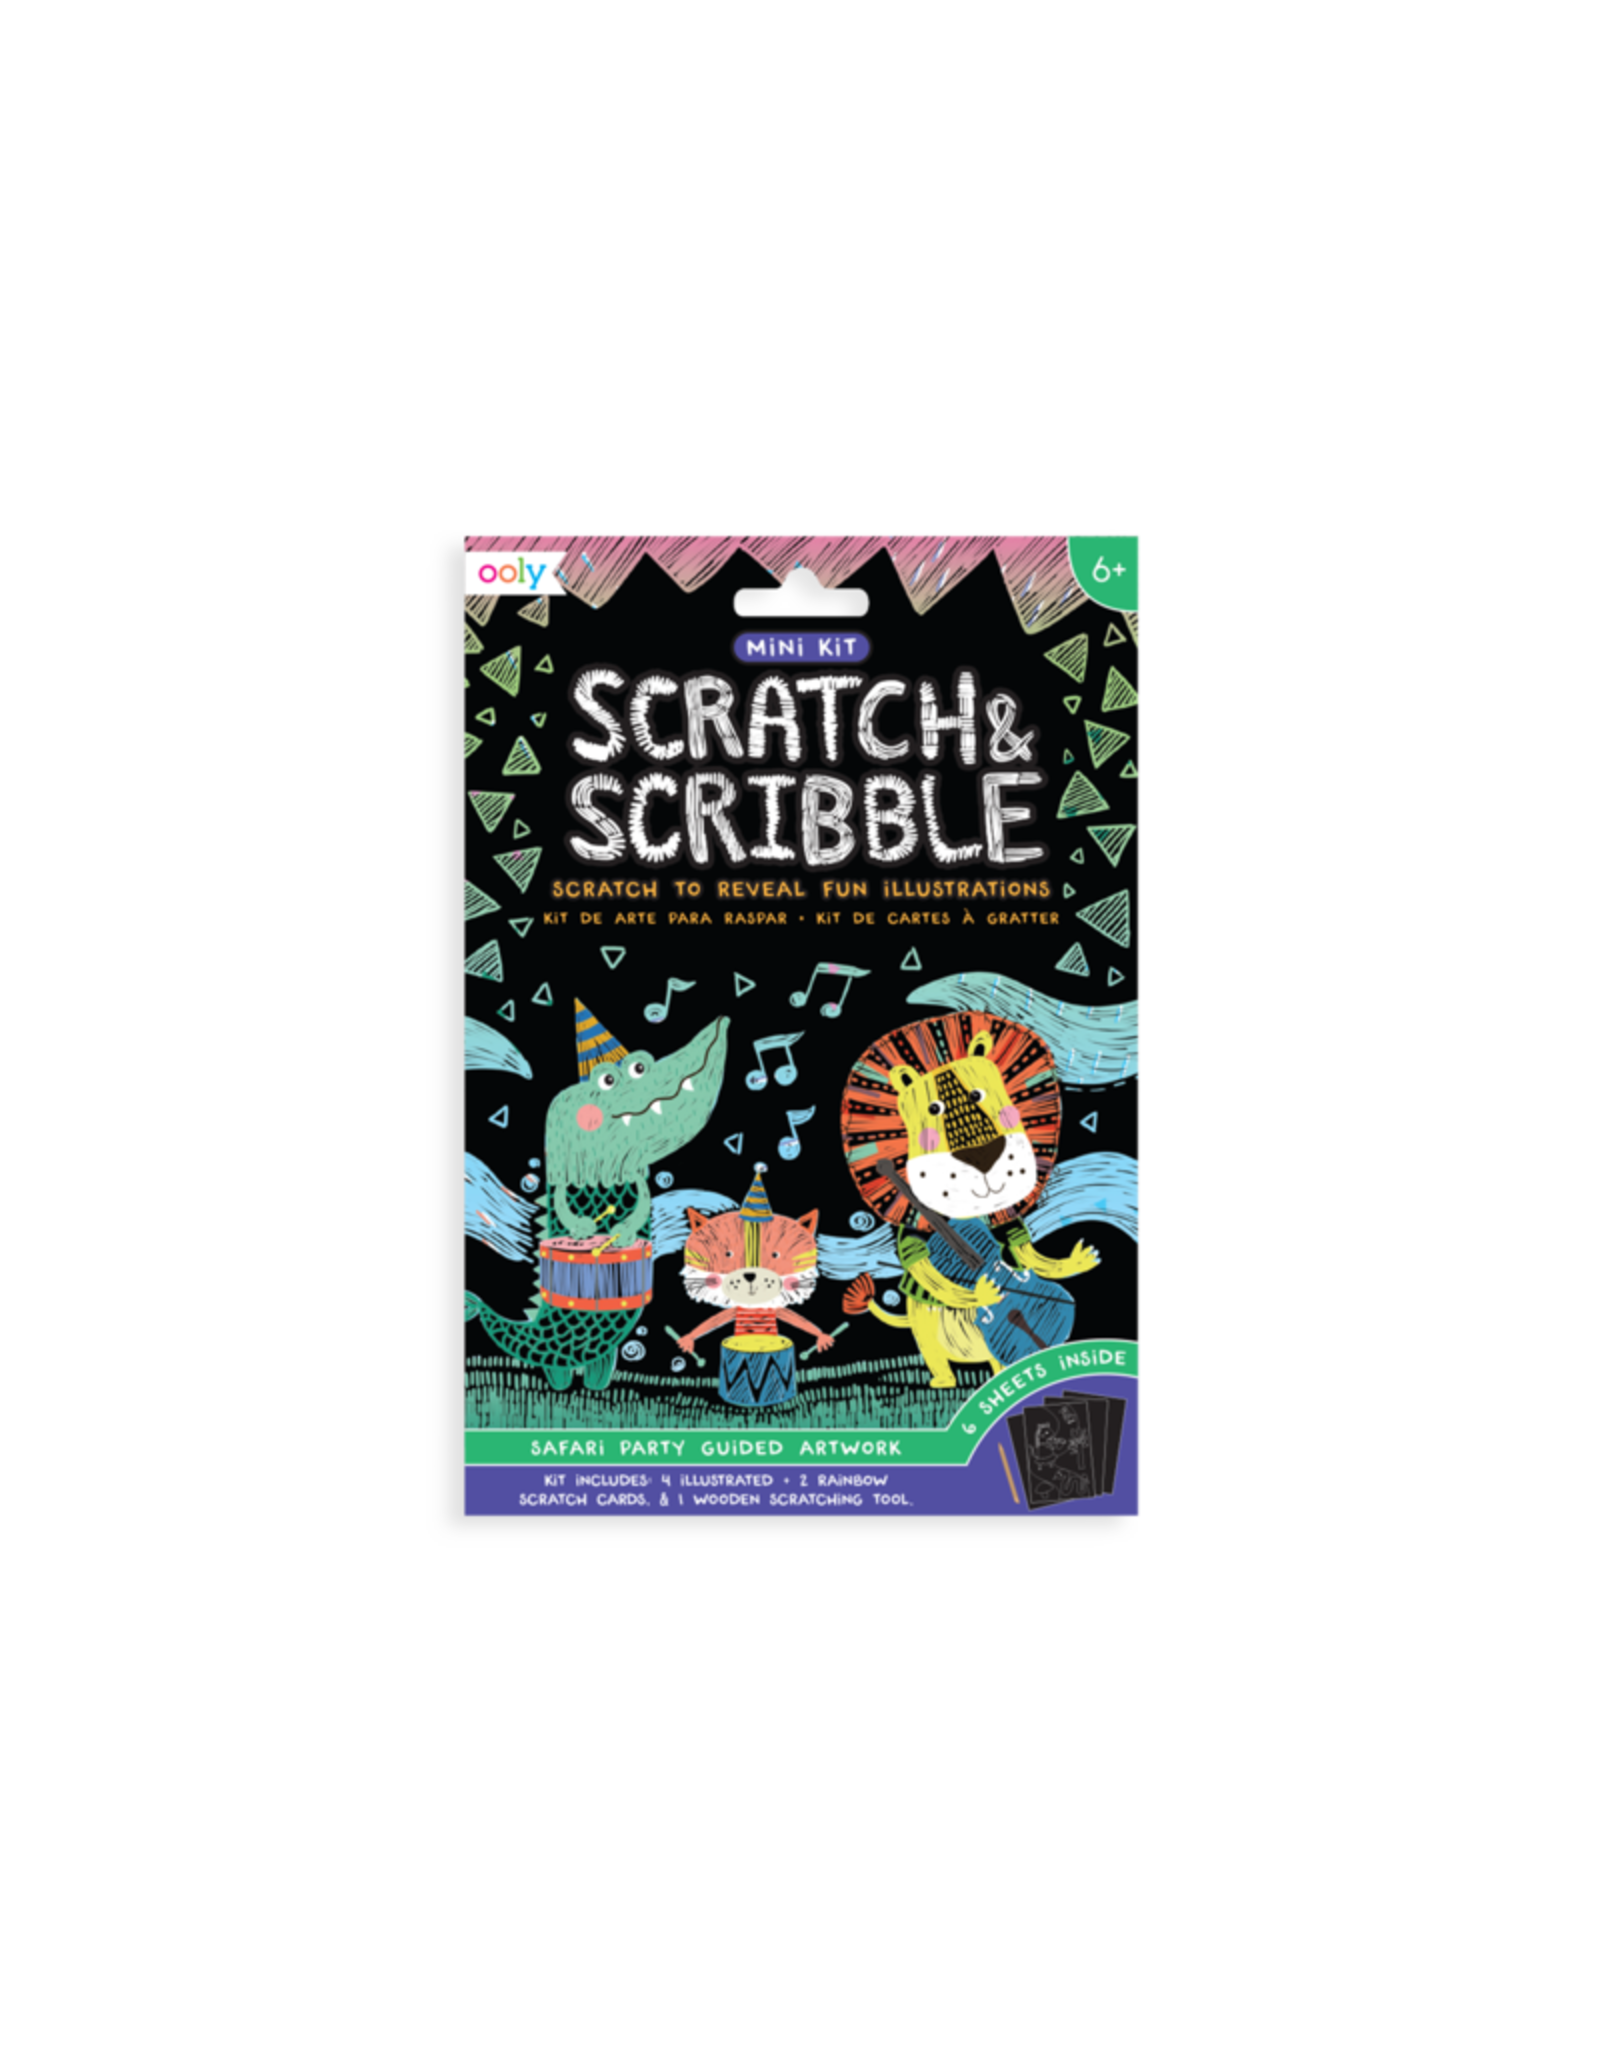 OOLY Scratch & Scribble Mini Kit (6+)